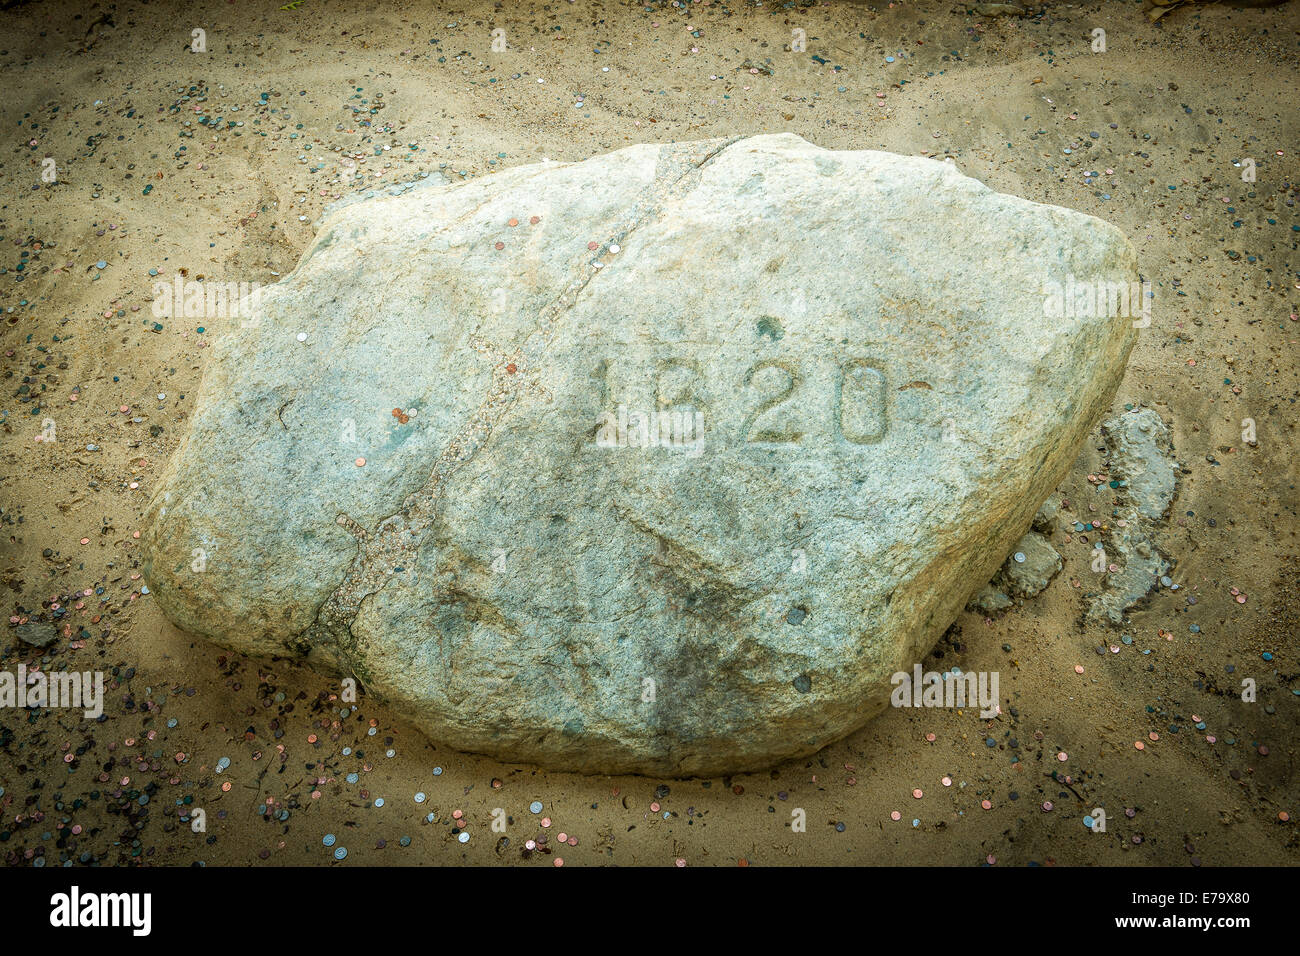 Plymouth Rock, the stone onto which the Mayflower Pilgrims disembarked in 1620. Massachusetts - USA. Stock Photo